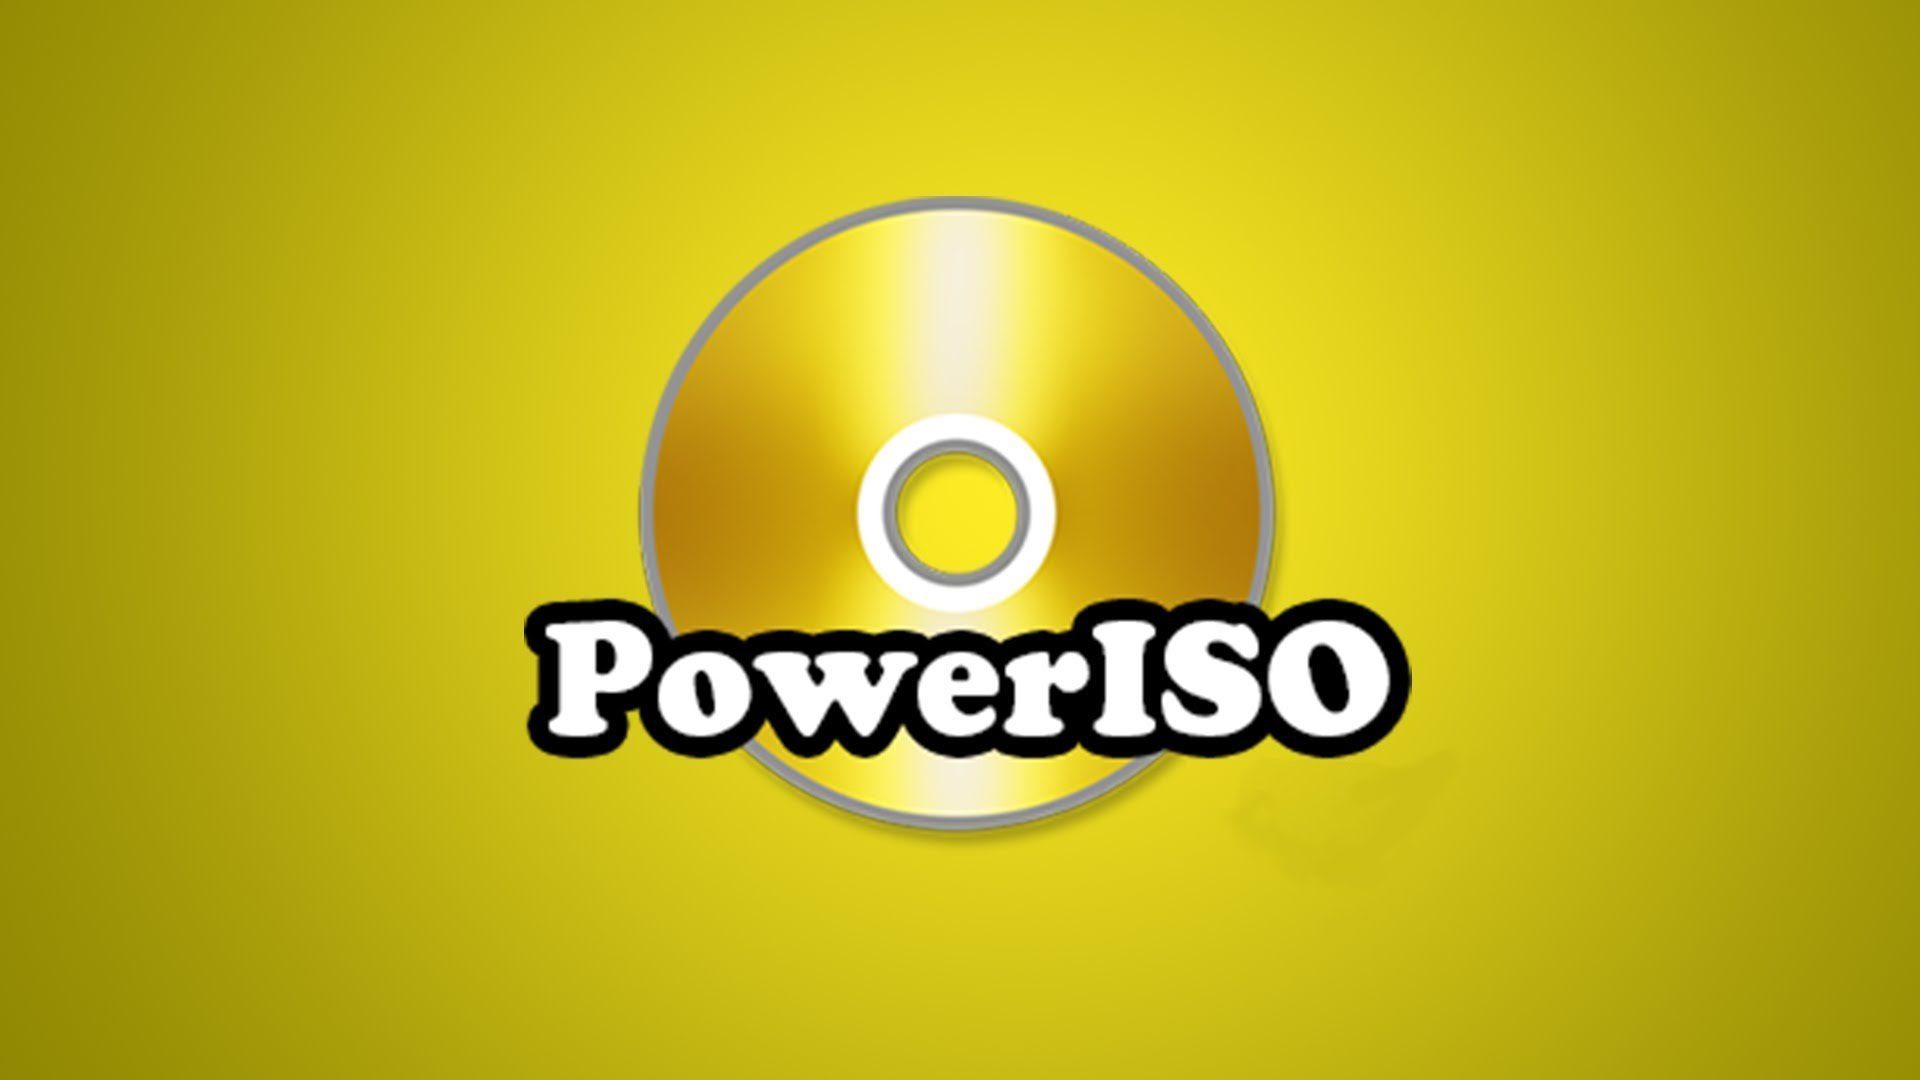 Free download software power iso 4.7 full version 11th commerce book pdf download in english